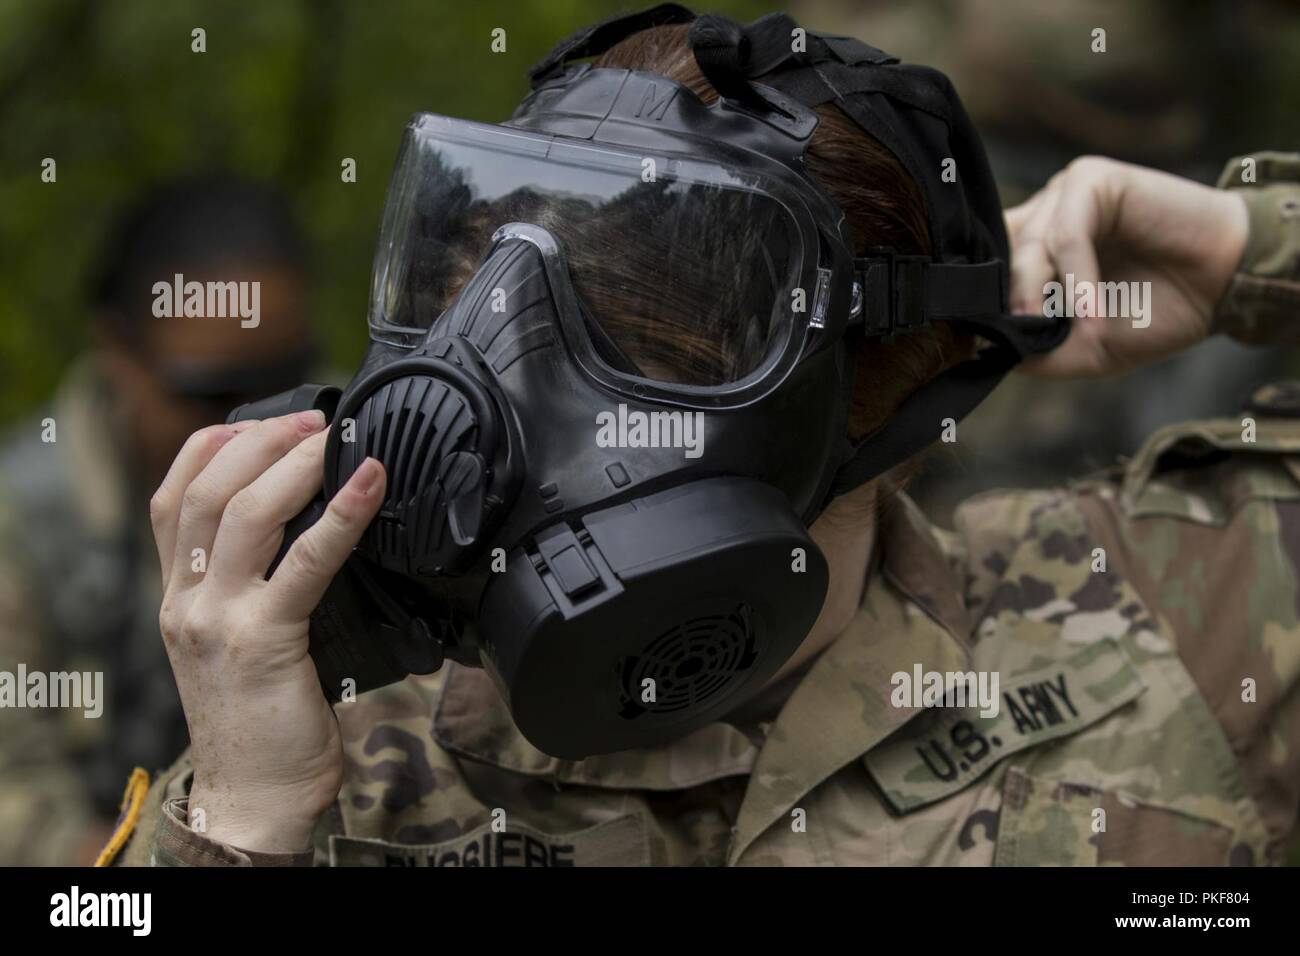 Pfc. Taylor Bussiere, an Army Reserve military police Soldier assigned to the 302nd Military Police Company based out of Grand Prairie, Texas, dons her protective mask during a simulated chemical attack during lethal warrior skills training as part of Operation Blue Shield Aug. 7, 2018, at Fort McCoy, Wisconsin. Operation Blue Shield, is a functional exercise, broken down into 2-week cycles, centered on squad and team-level training with a focus on internment, resettlement, detainee operations and combat support. During each two-week cycle, Solders train on internment operations, weapons quali Stock Photo